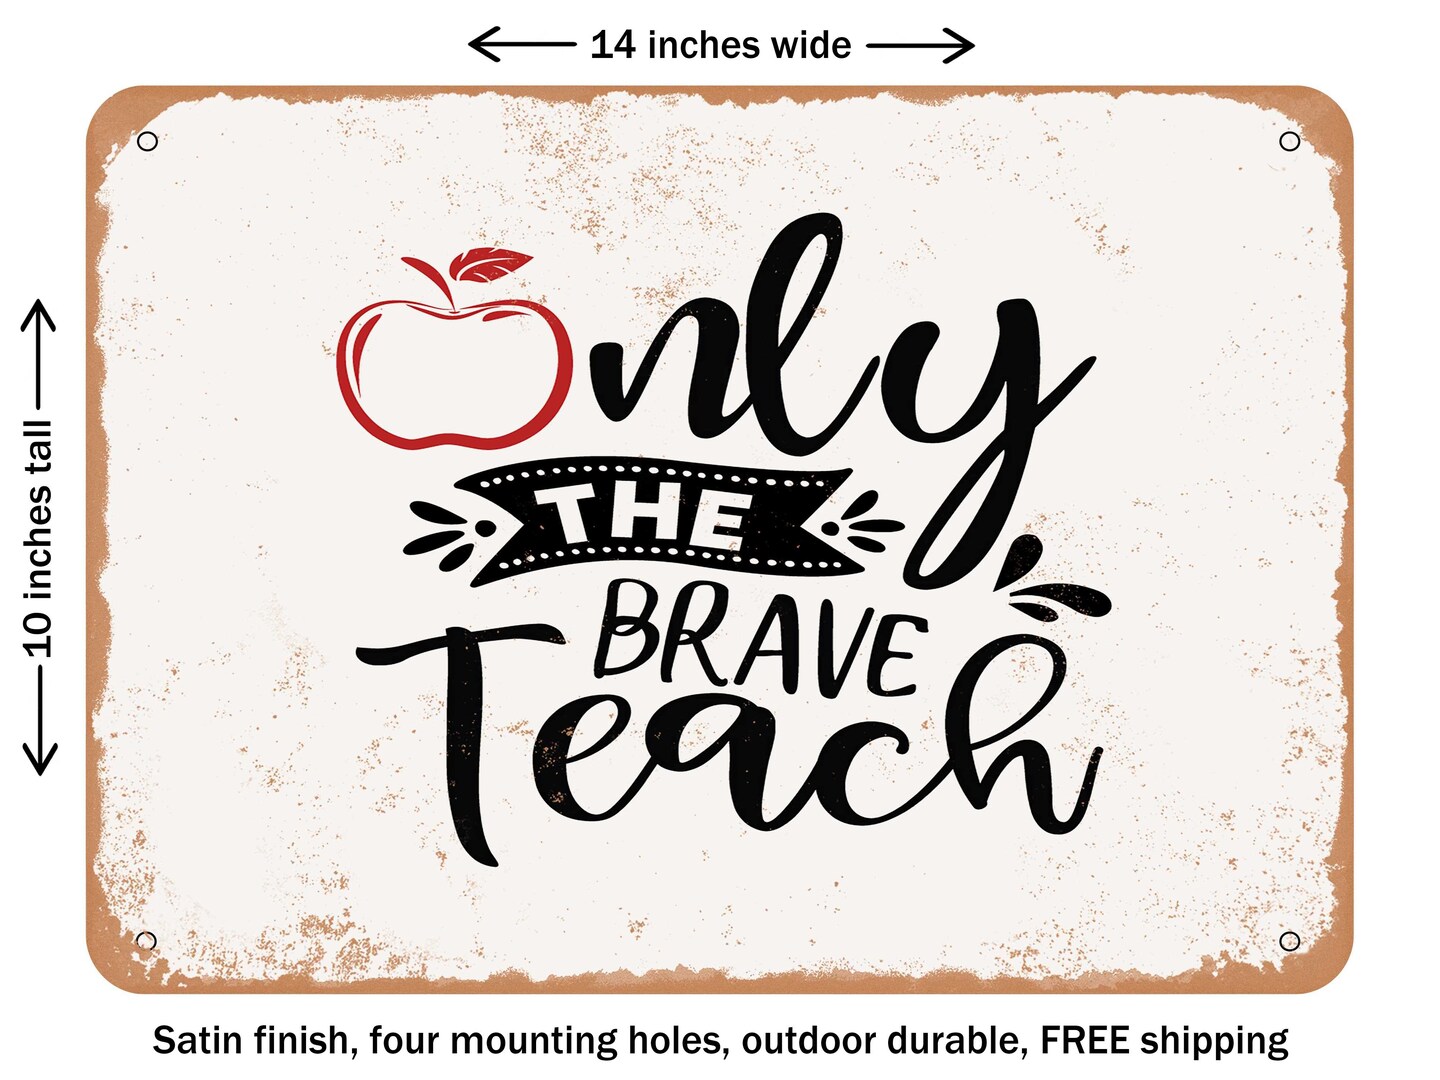 DECORATIVE METAL SIGN - Only the Brave Teach - 5 - Vintage Rusty Look